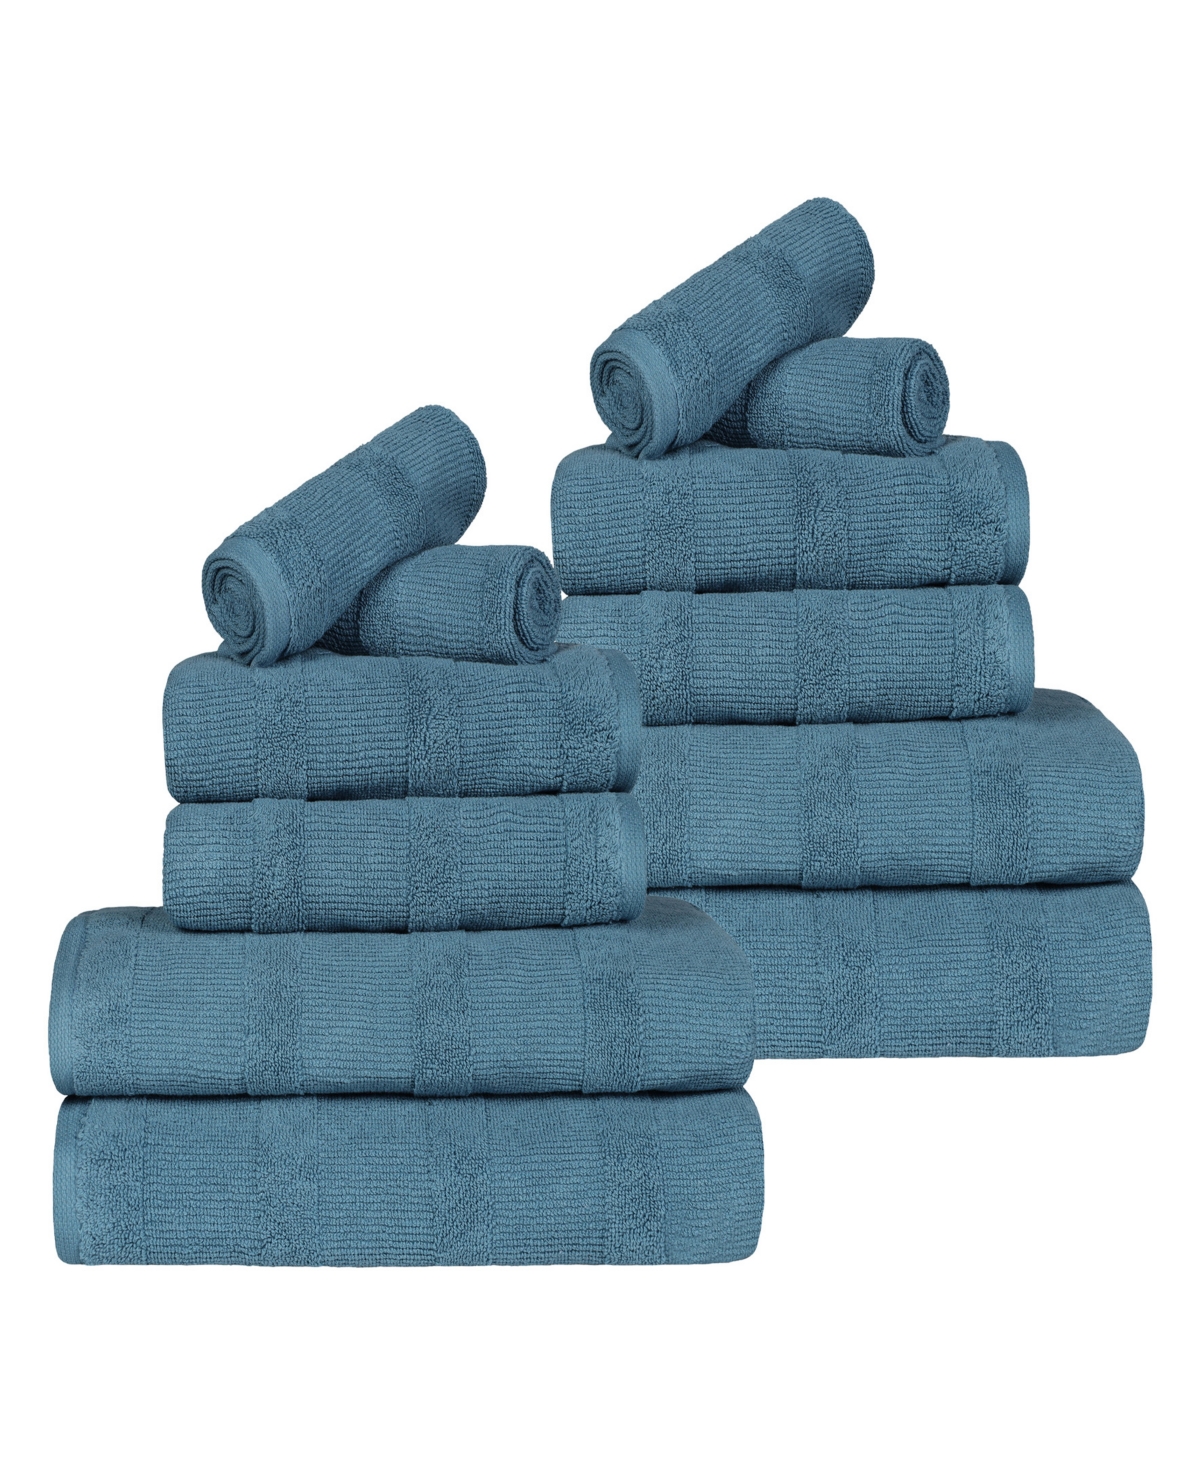 Superior Roma Ribbed Turkish Cotton Quick-dry Solid Assorted Highly Absorbent Towel 12 Piece Set In Denim Blue